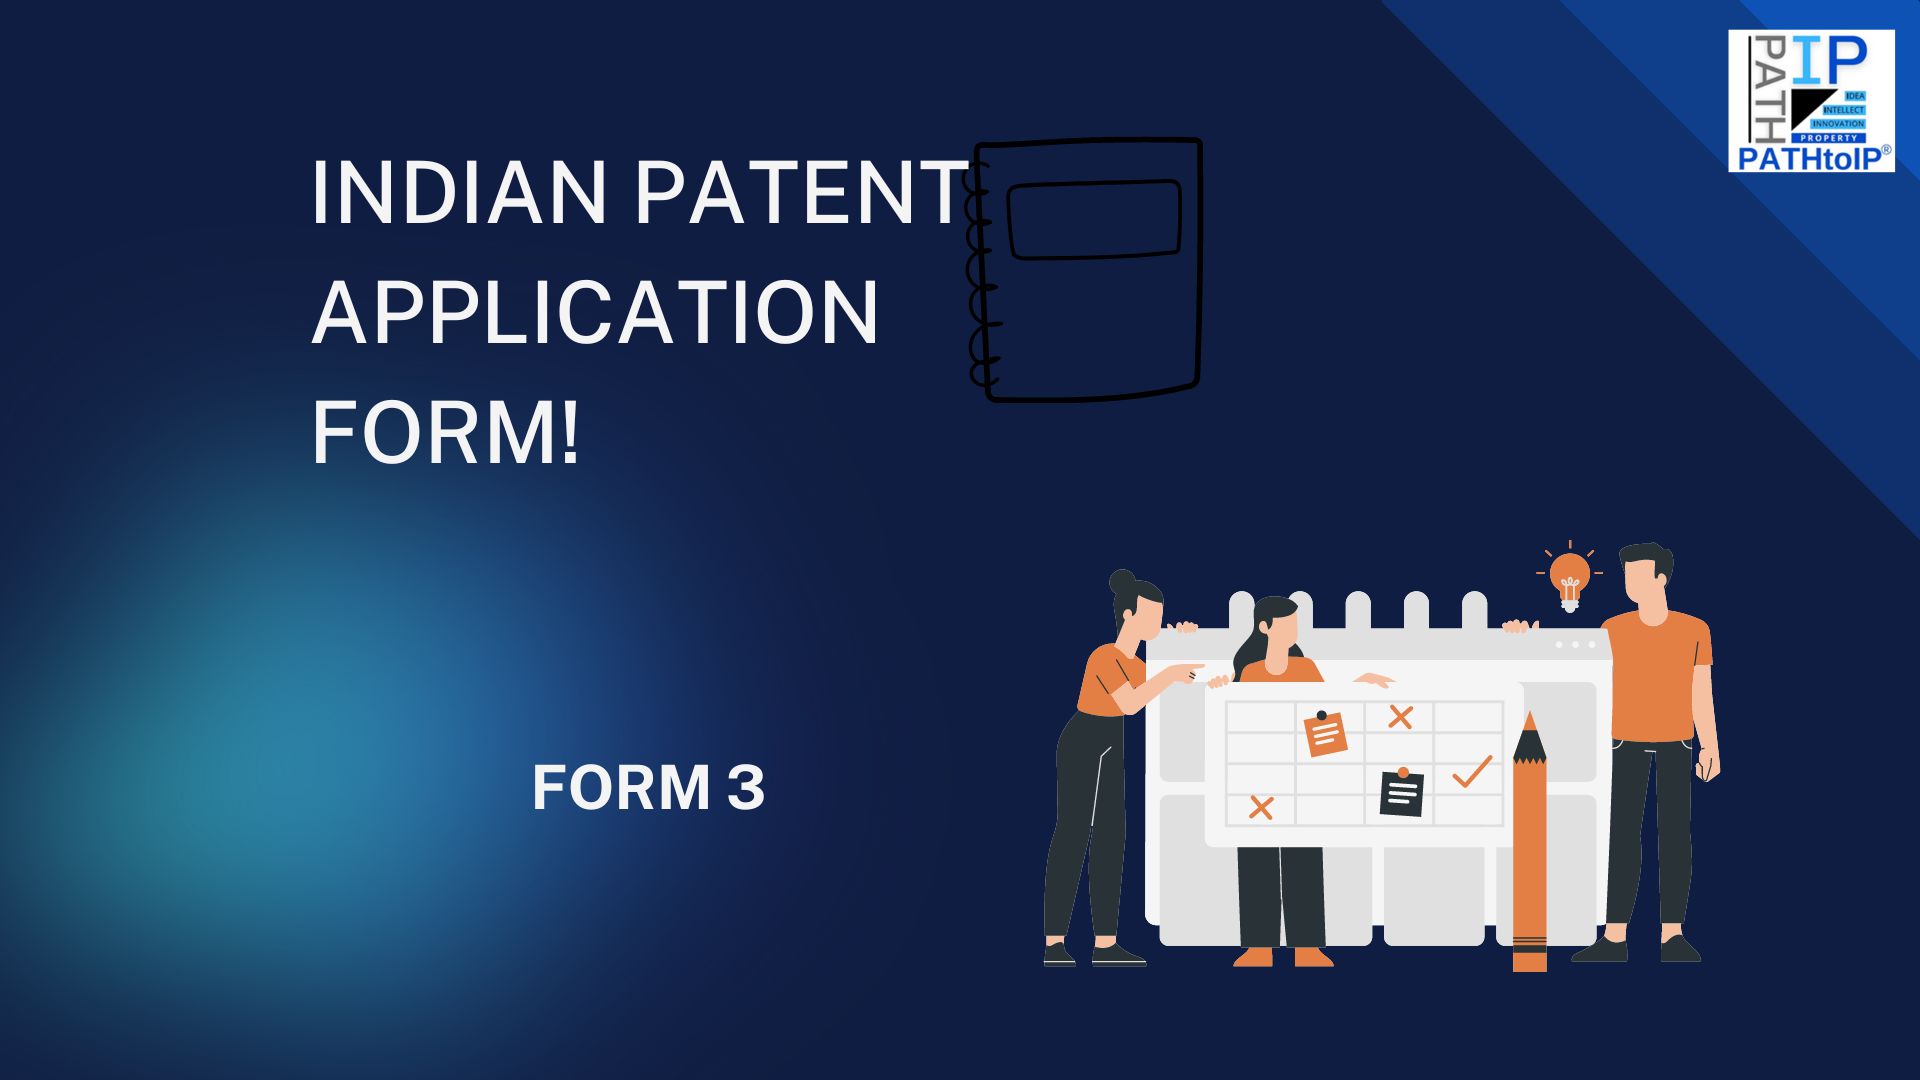 Indian Patent Forms: FORM 3